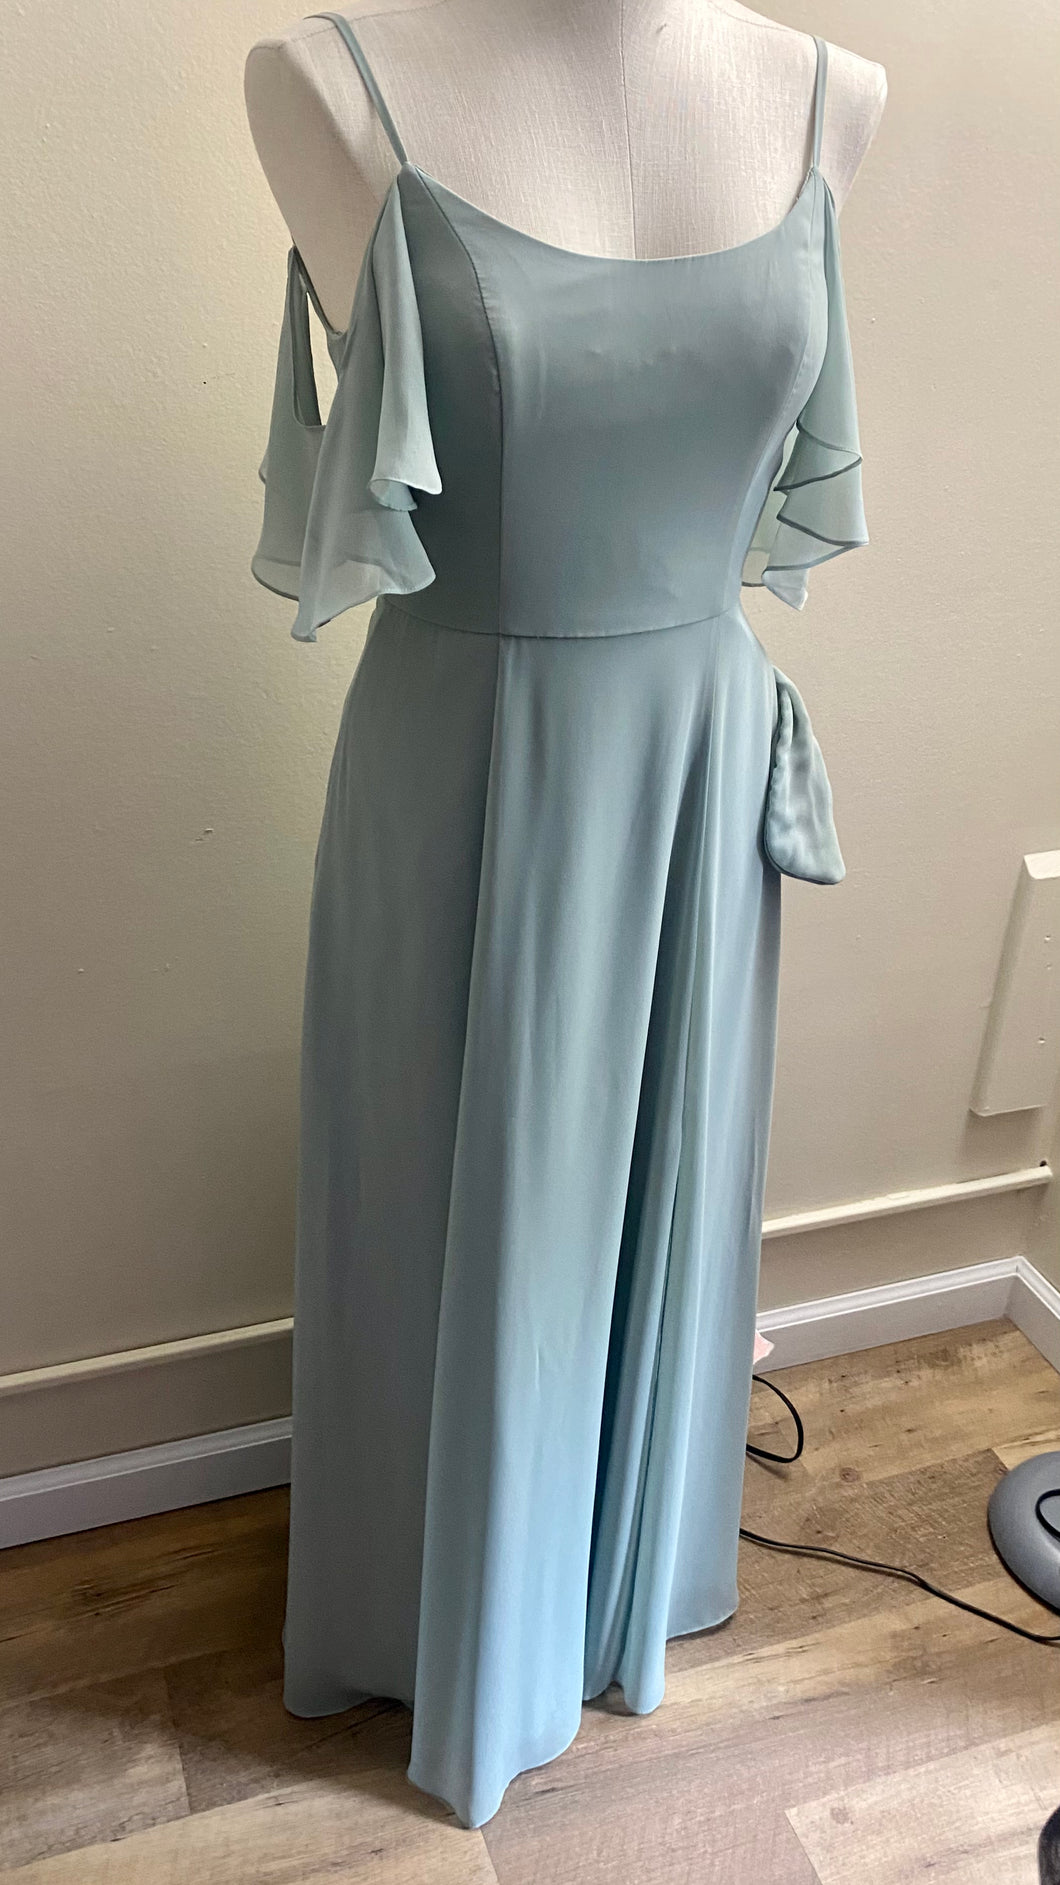 SCLE100-B Sage Green Gown. Size 2